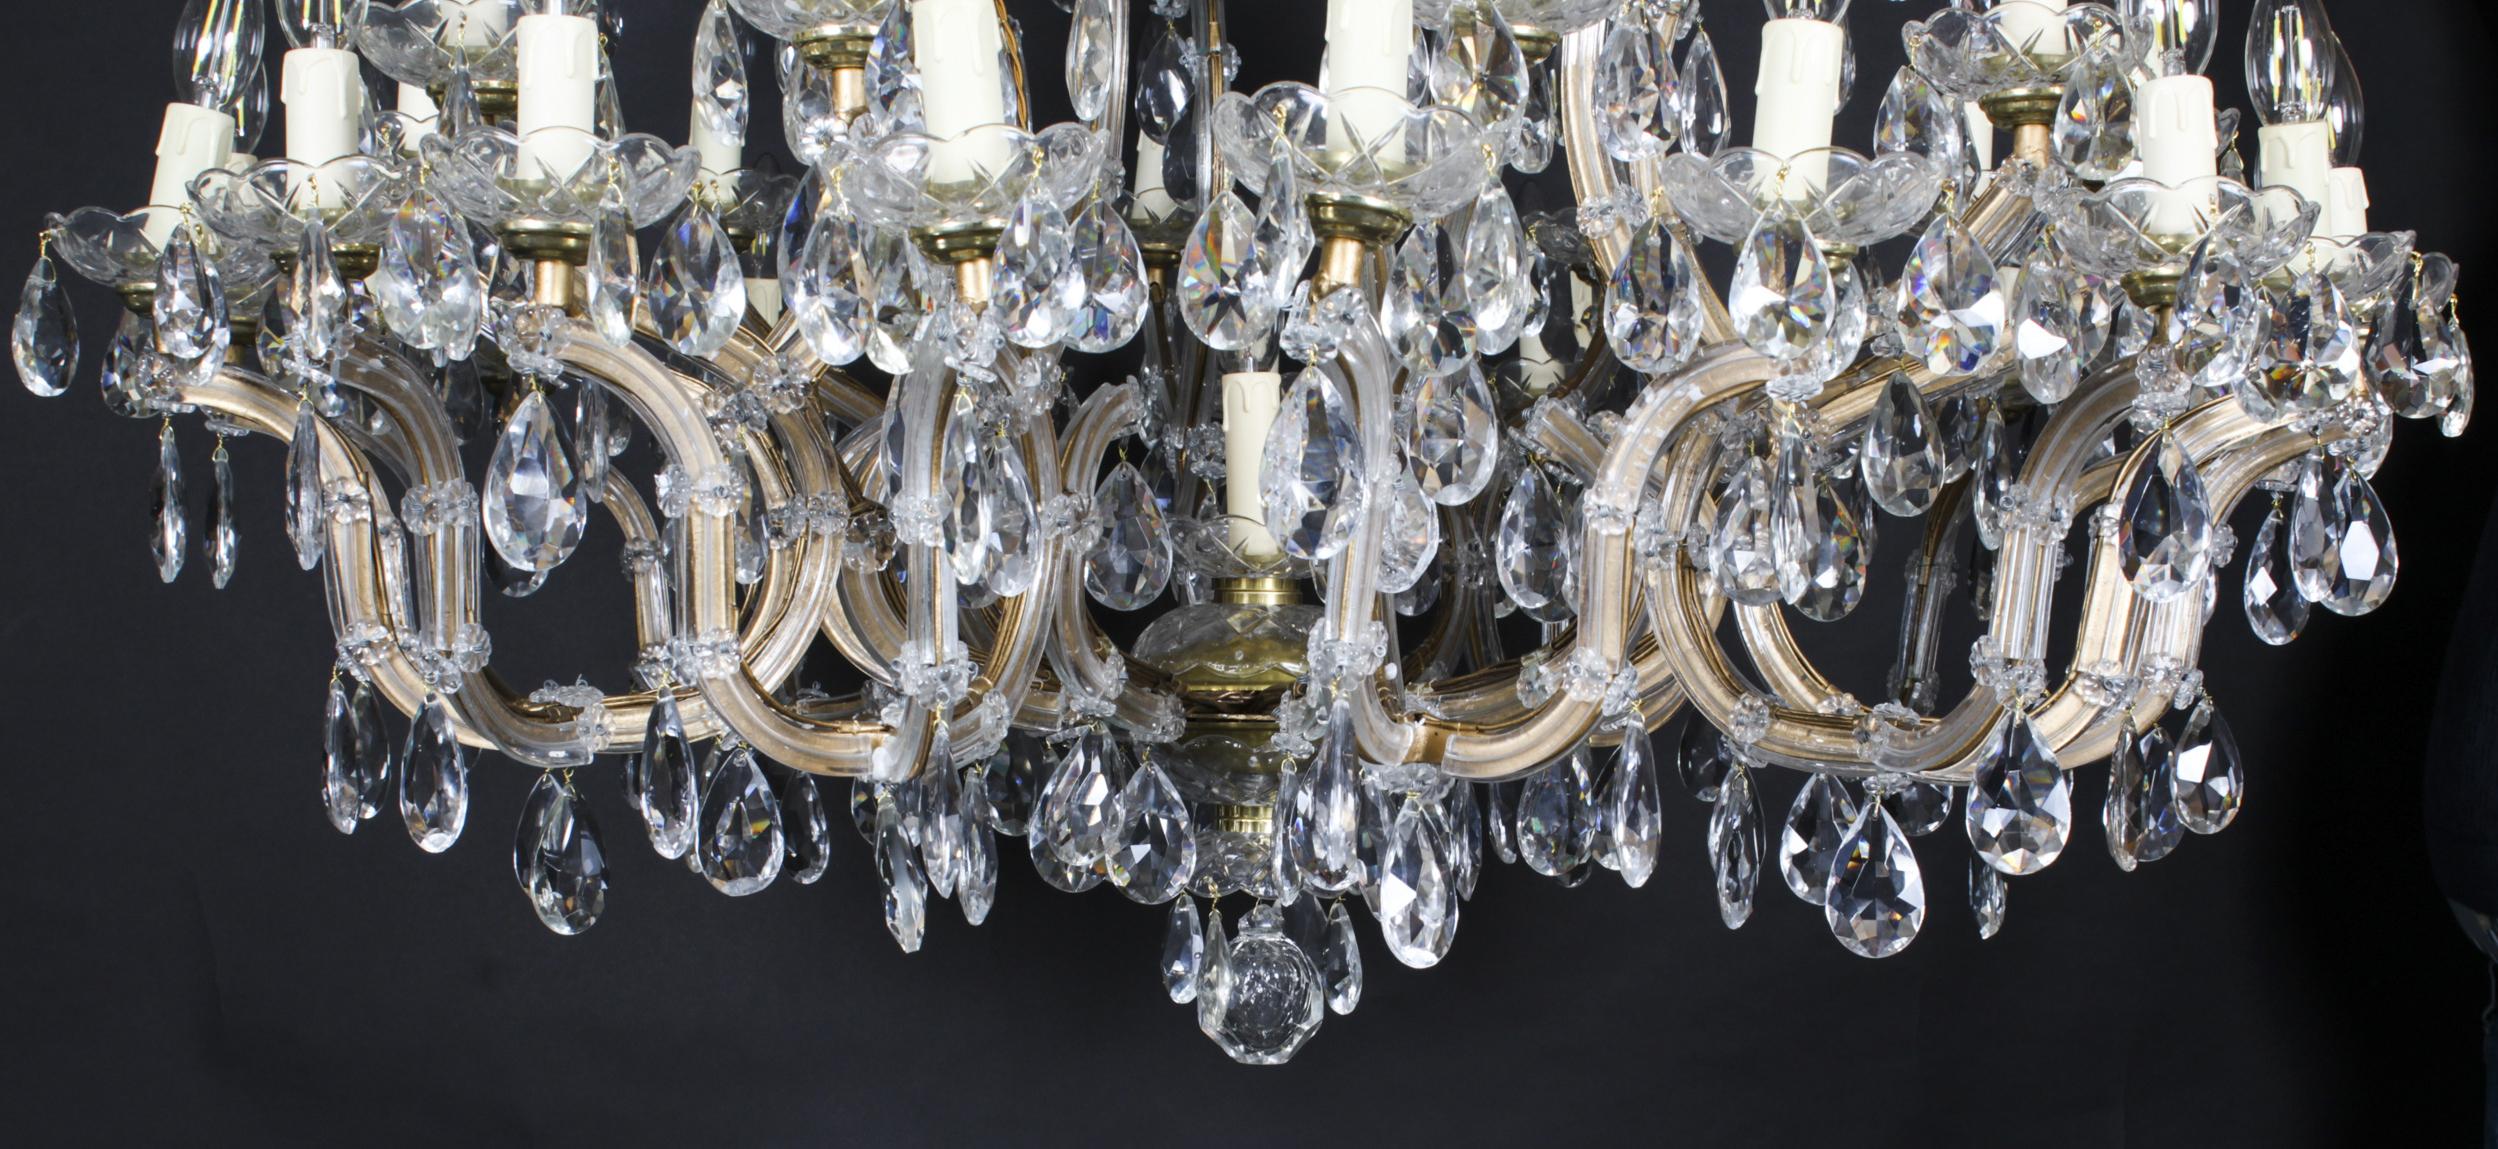 Antique English 41 Light Ballroom Crystal Chandelier 1920s In Good Condition For Sale In London, GB